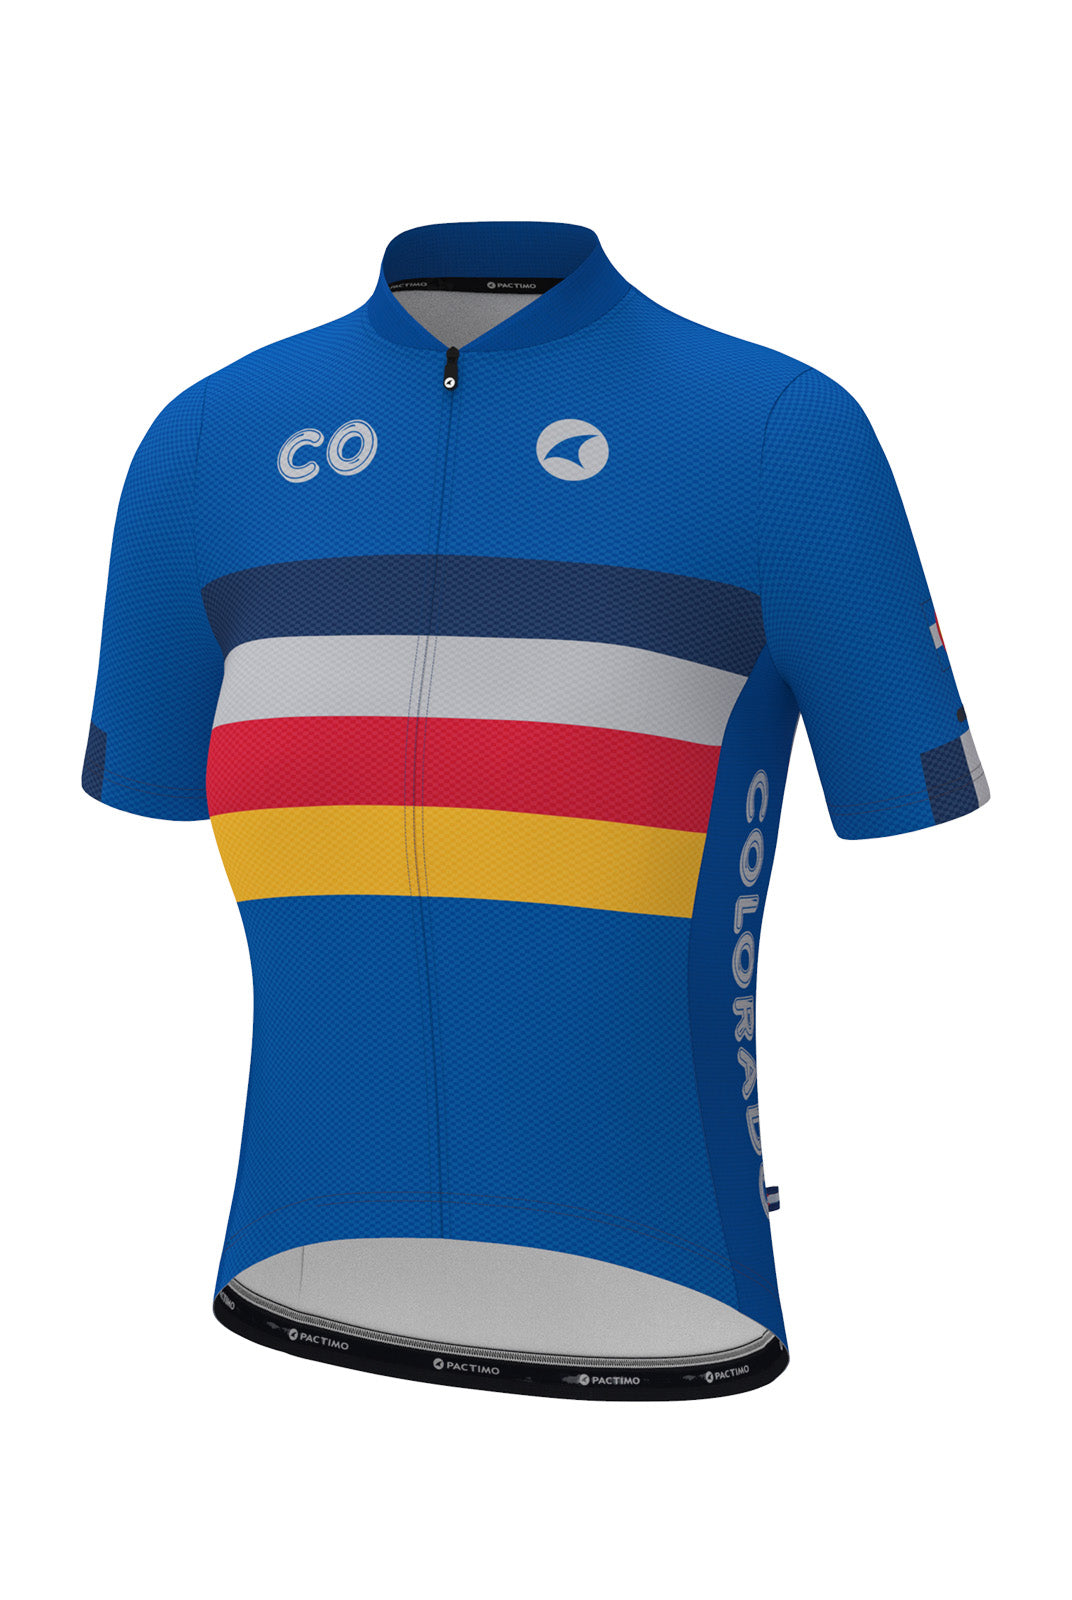 Women's Retro Colorado Cycling Jersey - Ascent Front View